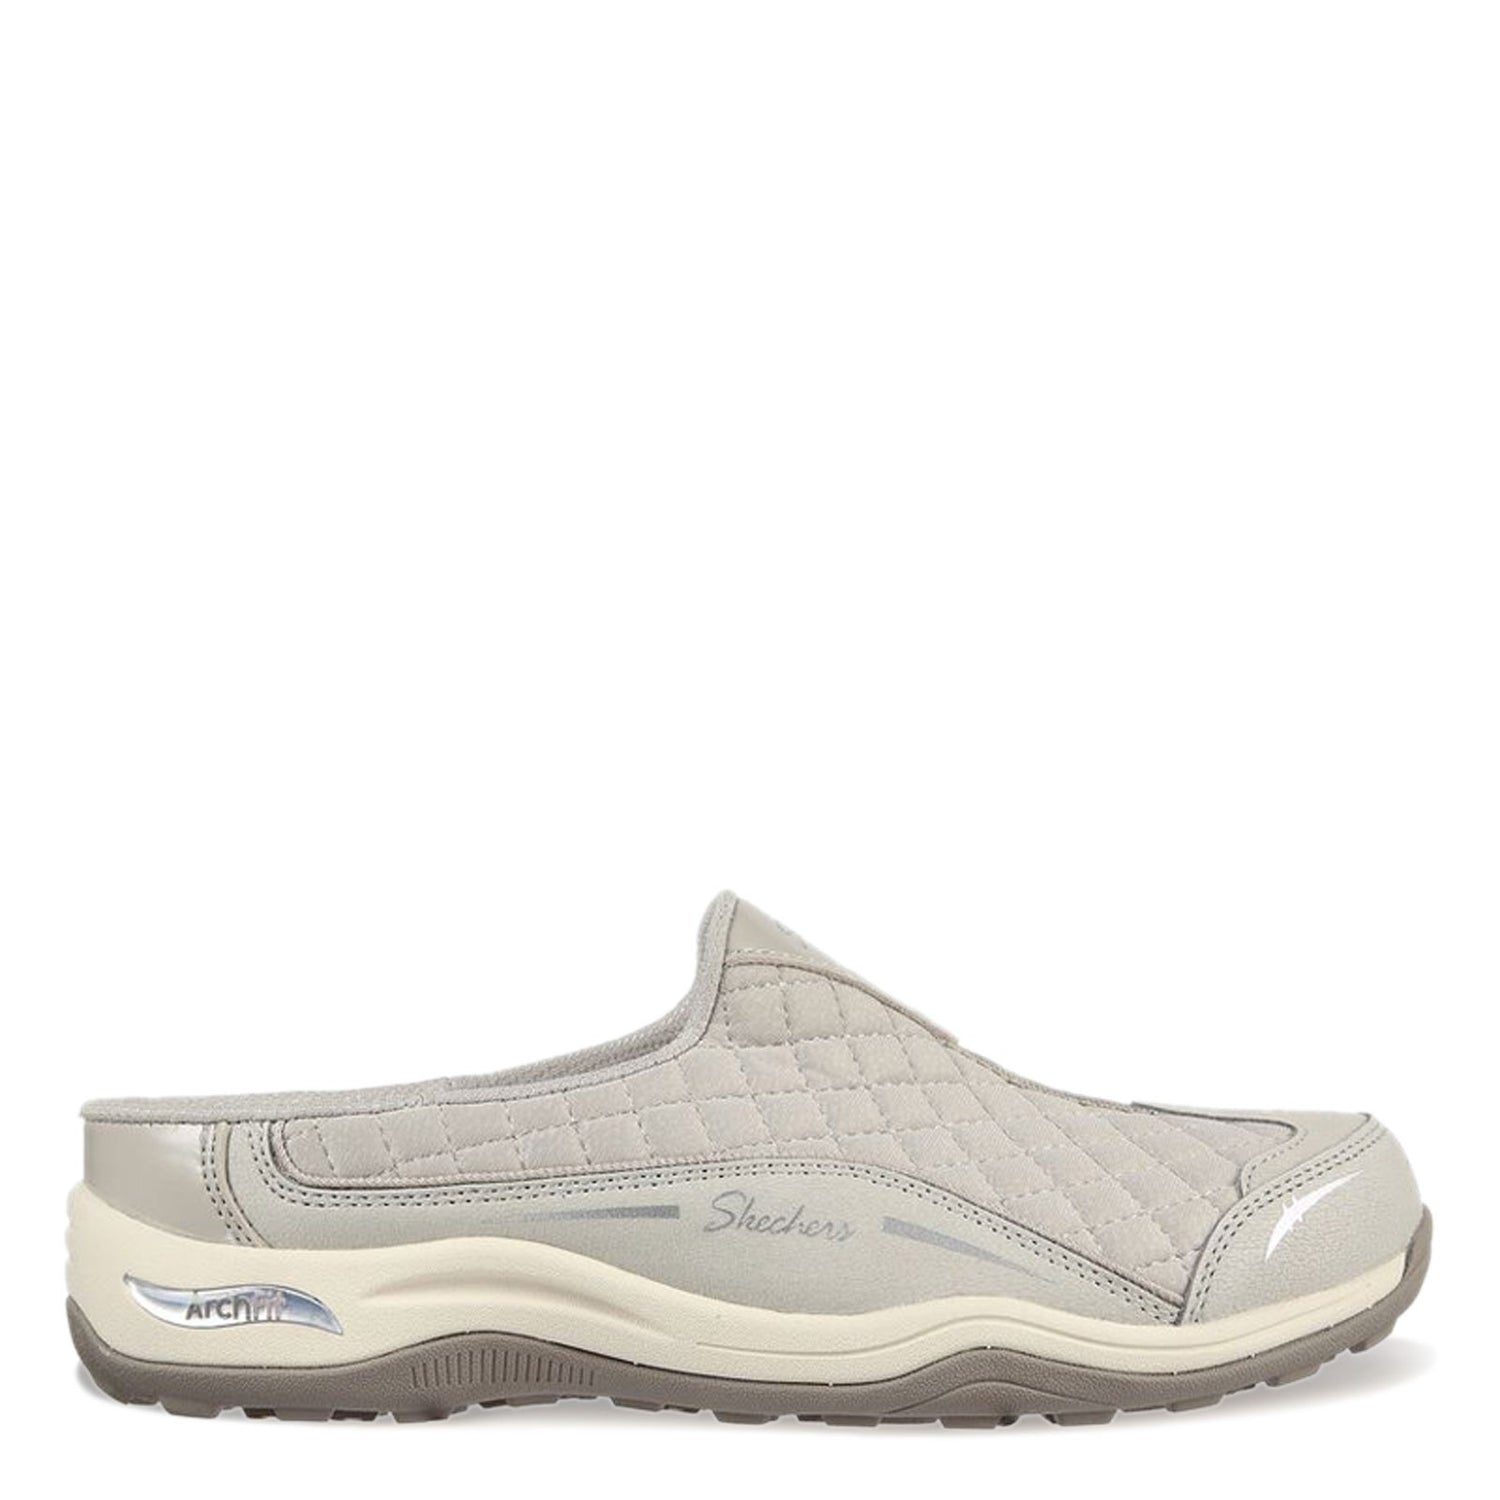 Peltz Shoes  Women's Skechers Relaxed Fit: Arch Fit - Commute Clog TAUPE 100322-TPE